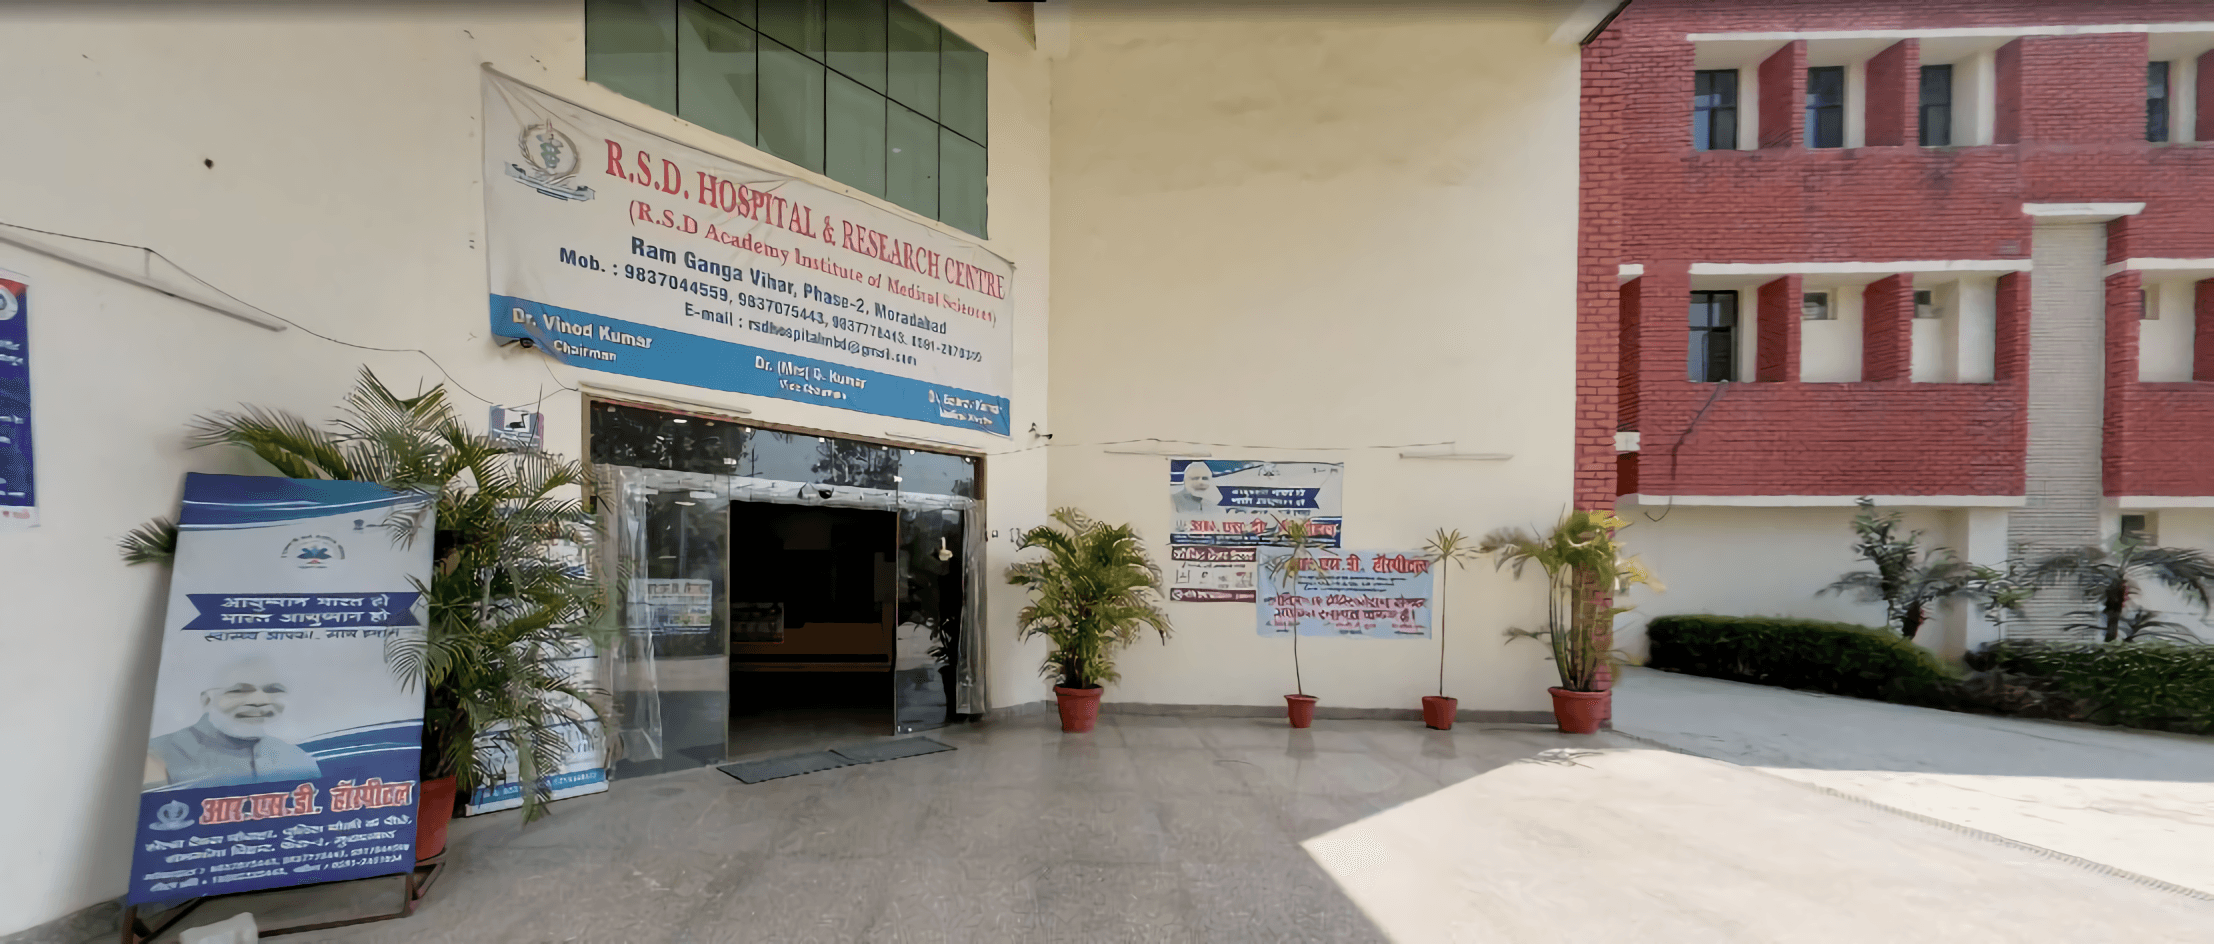 R. S. D Hospital And Research Centre